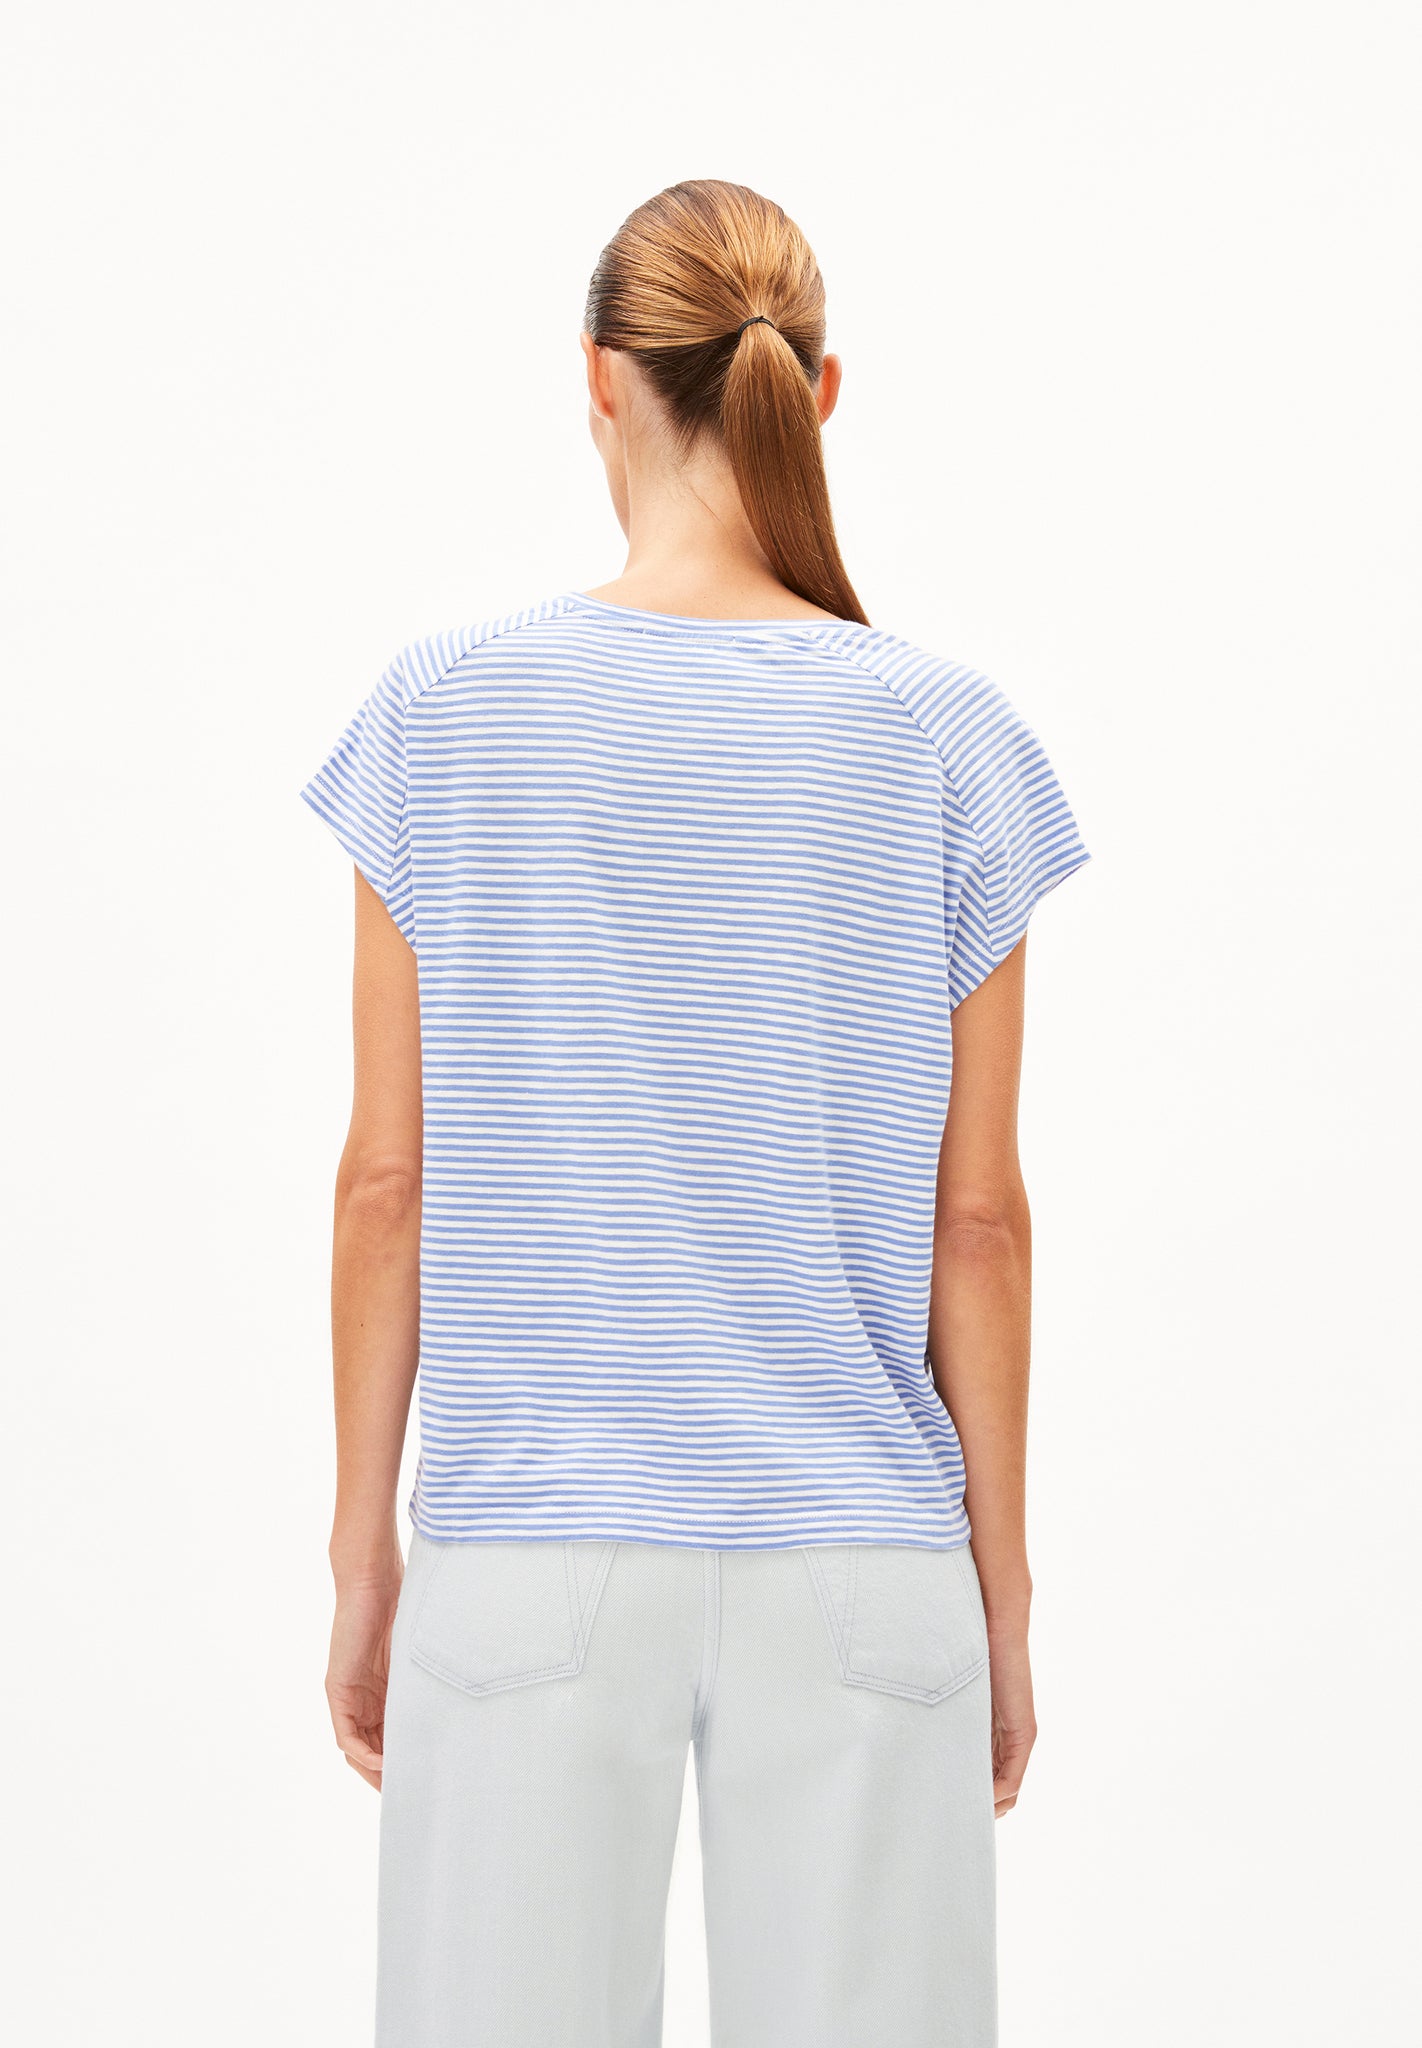 T-Shirt - Oneliaa Lovely Stripes| Loose Fit